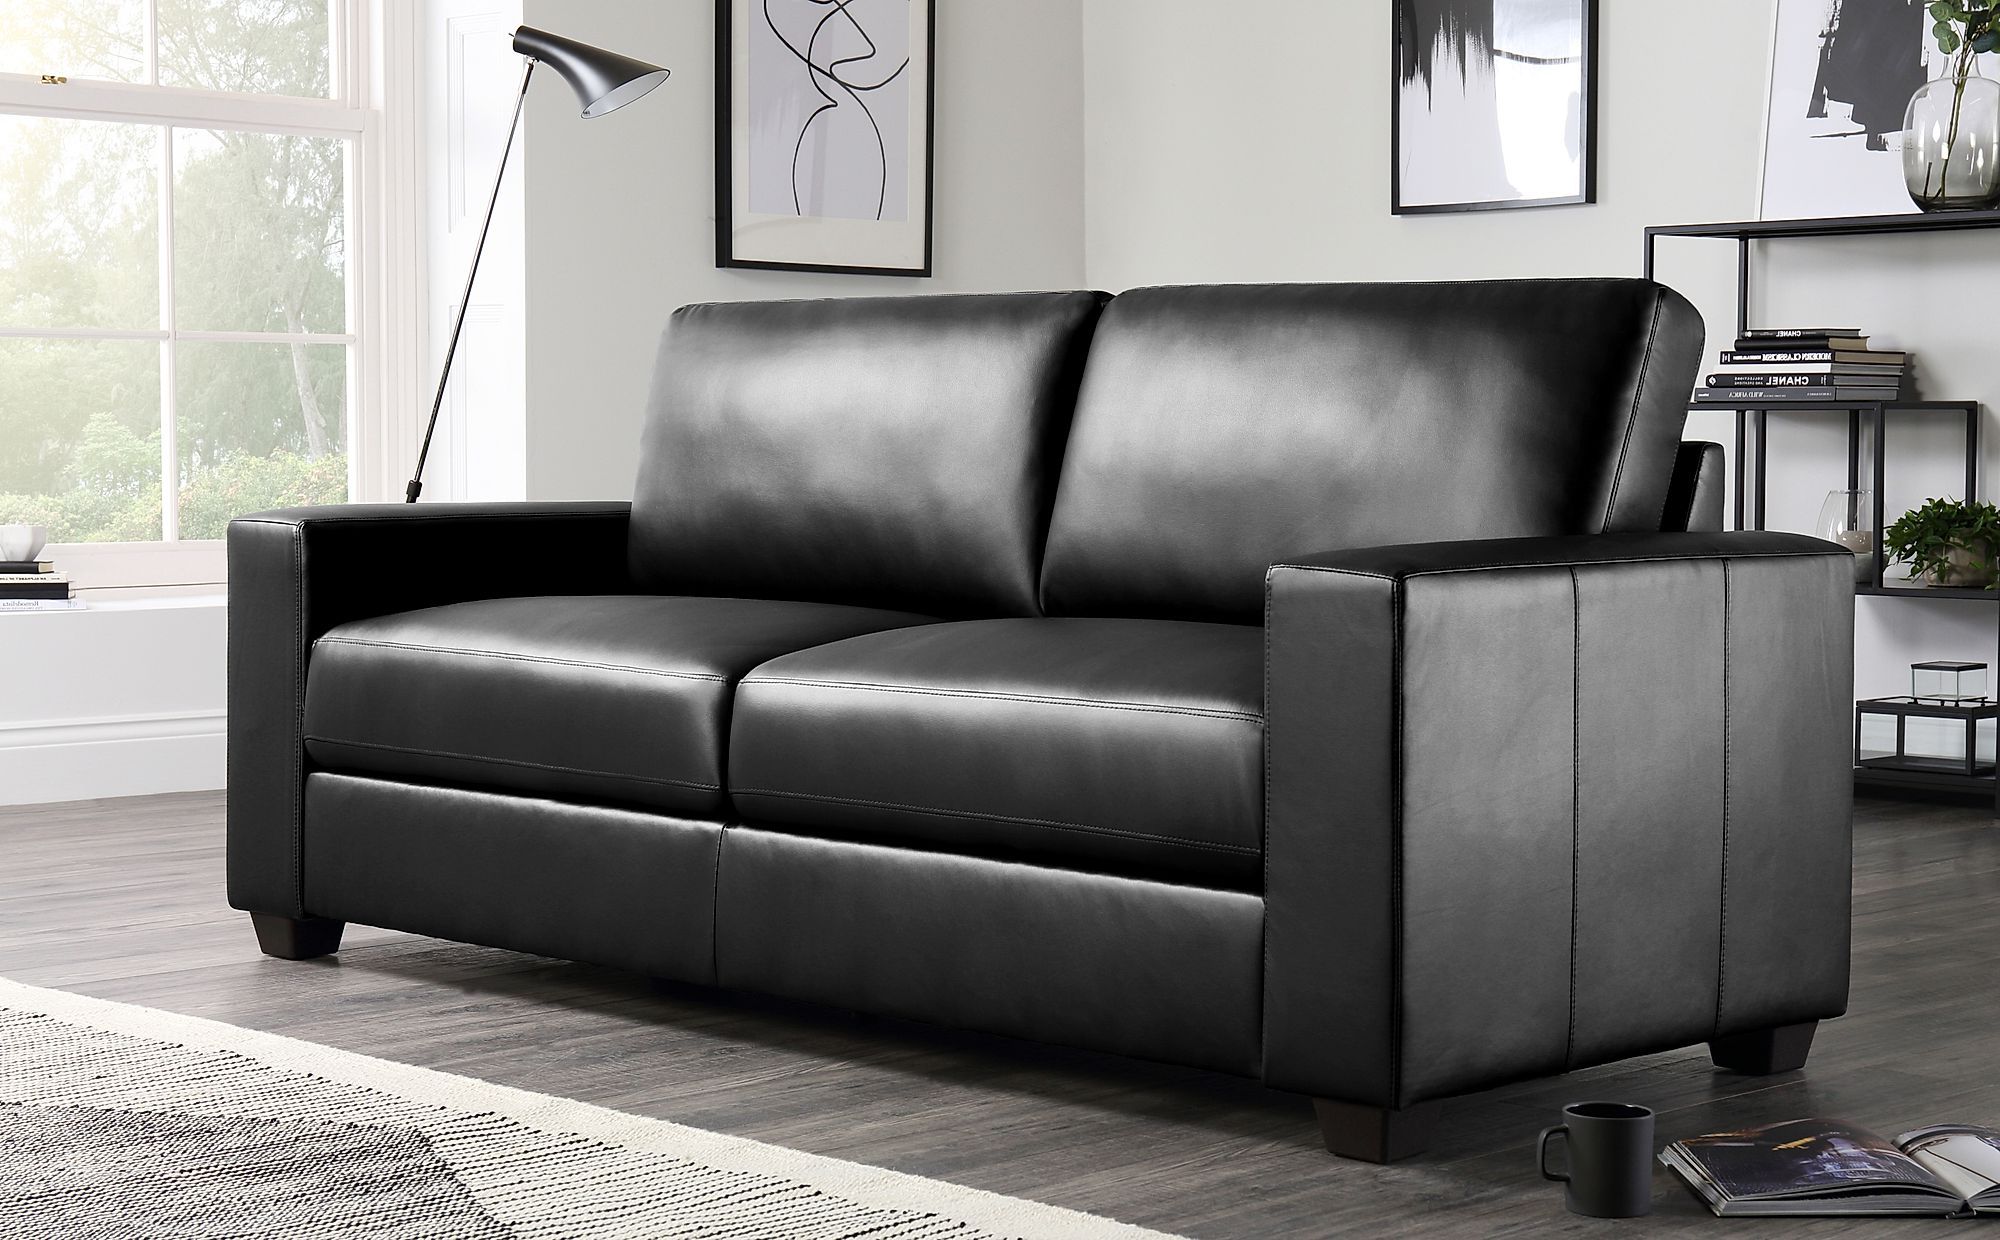 Most Recent Sofas In Black In Black Leather 3 Seater – The Arched Arms Look Great On This Sofa Suite (View 6 of 15)